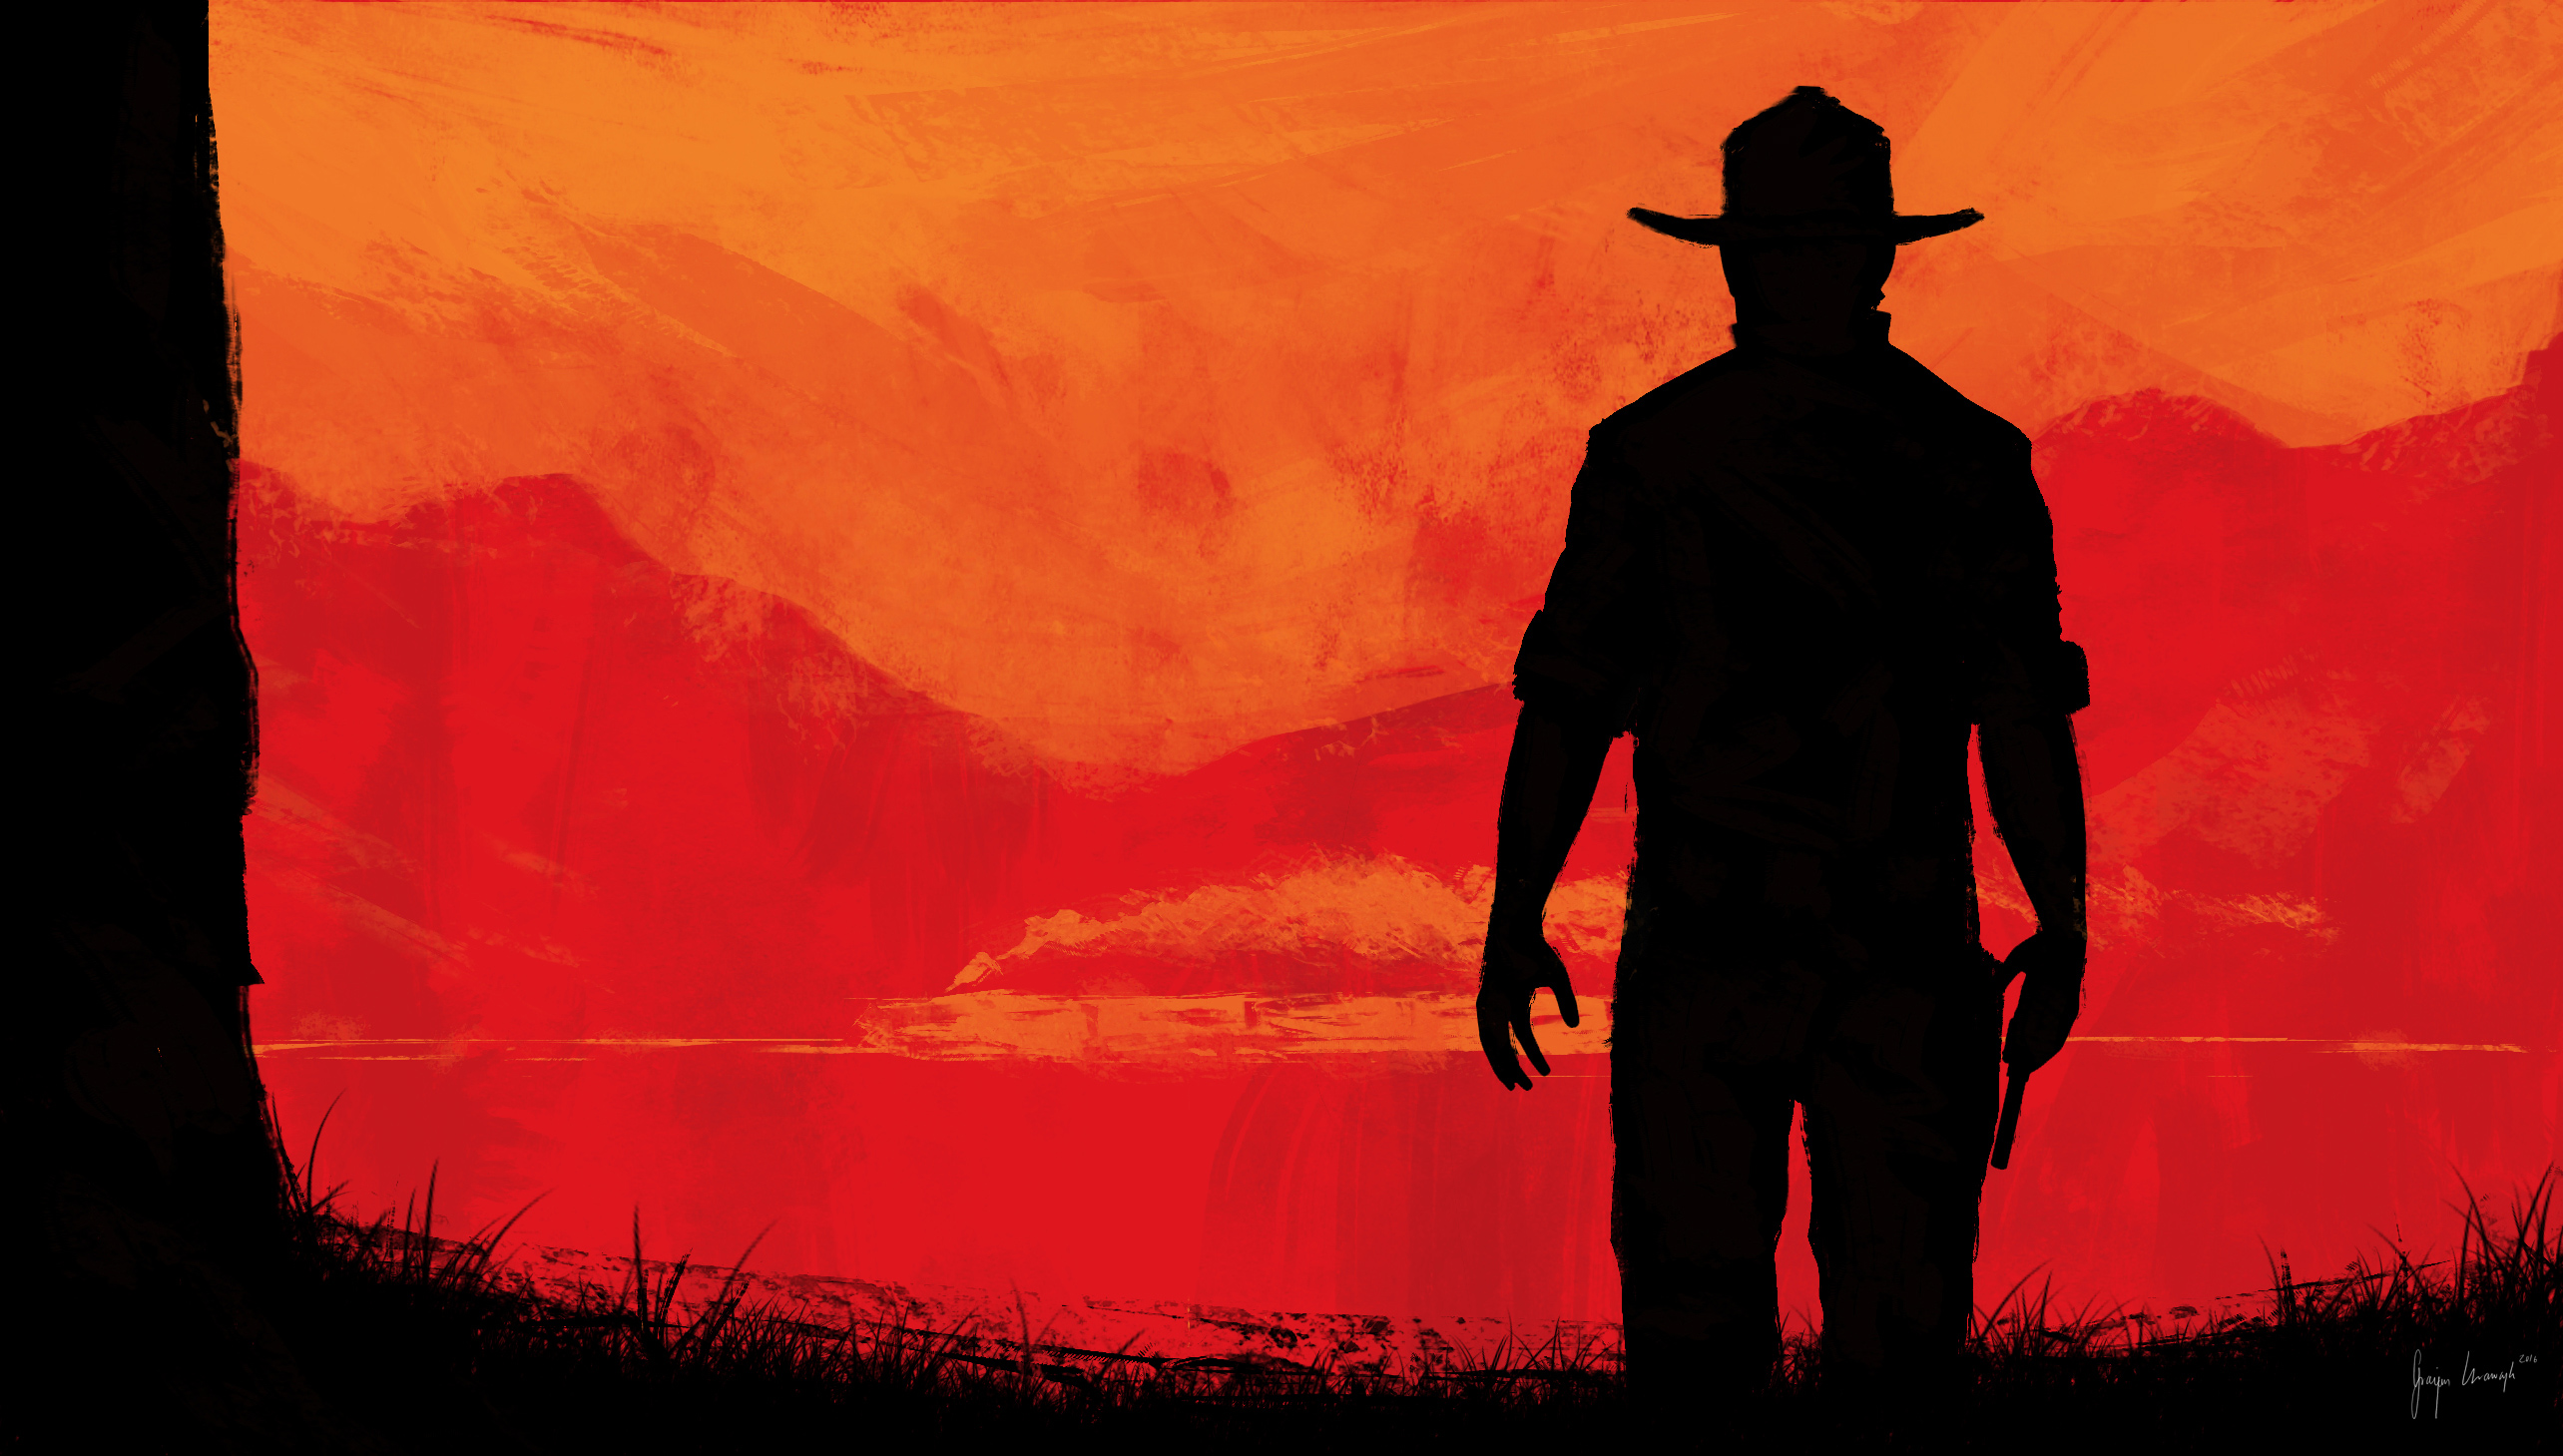 Video Game Red Dead Redemption HD Wallpaper